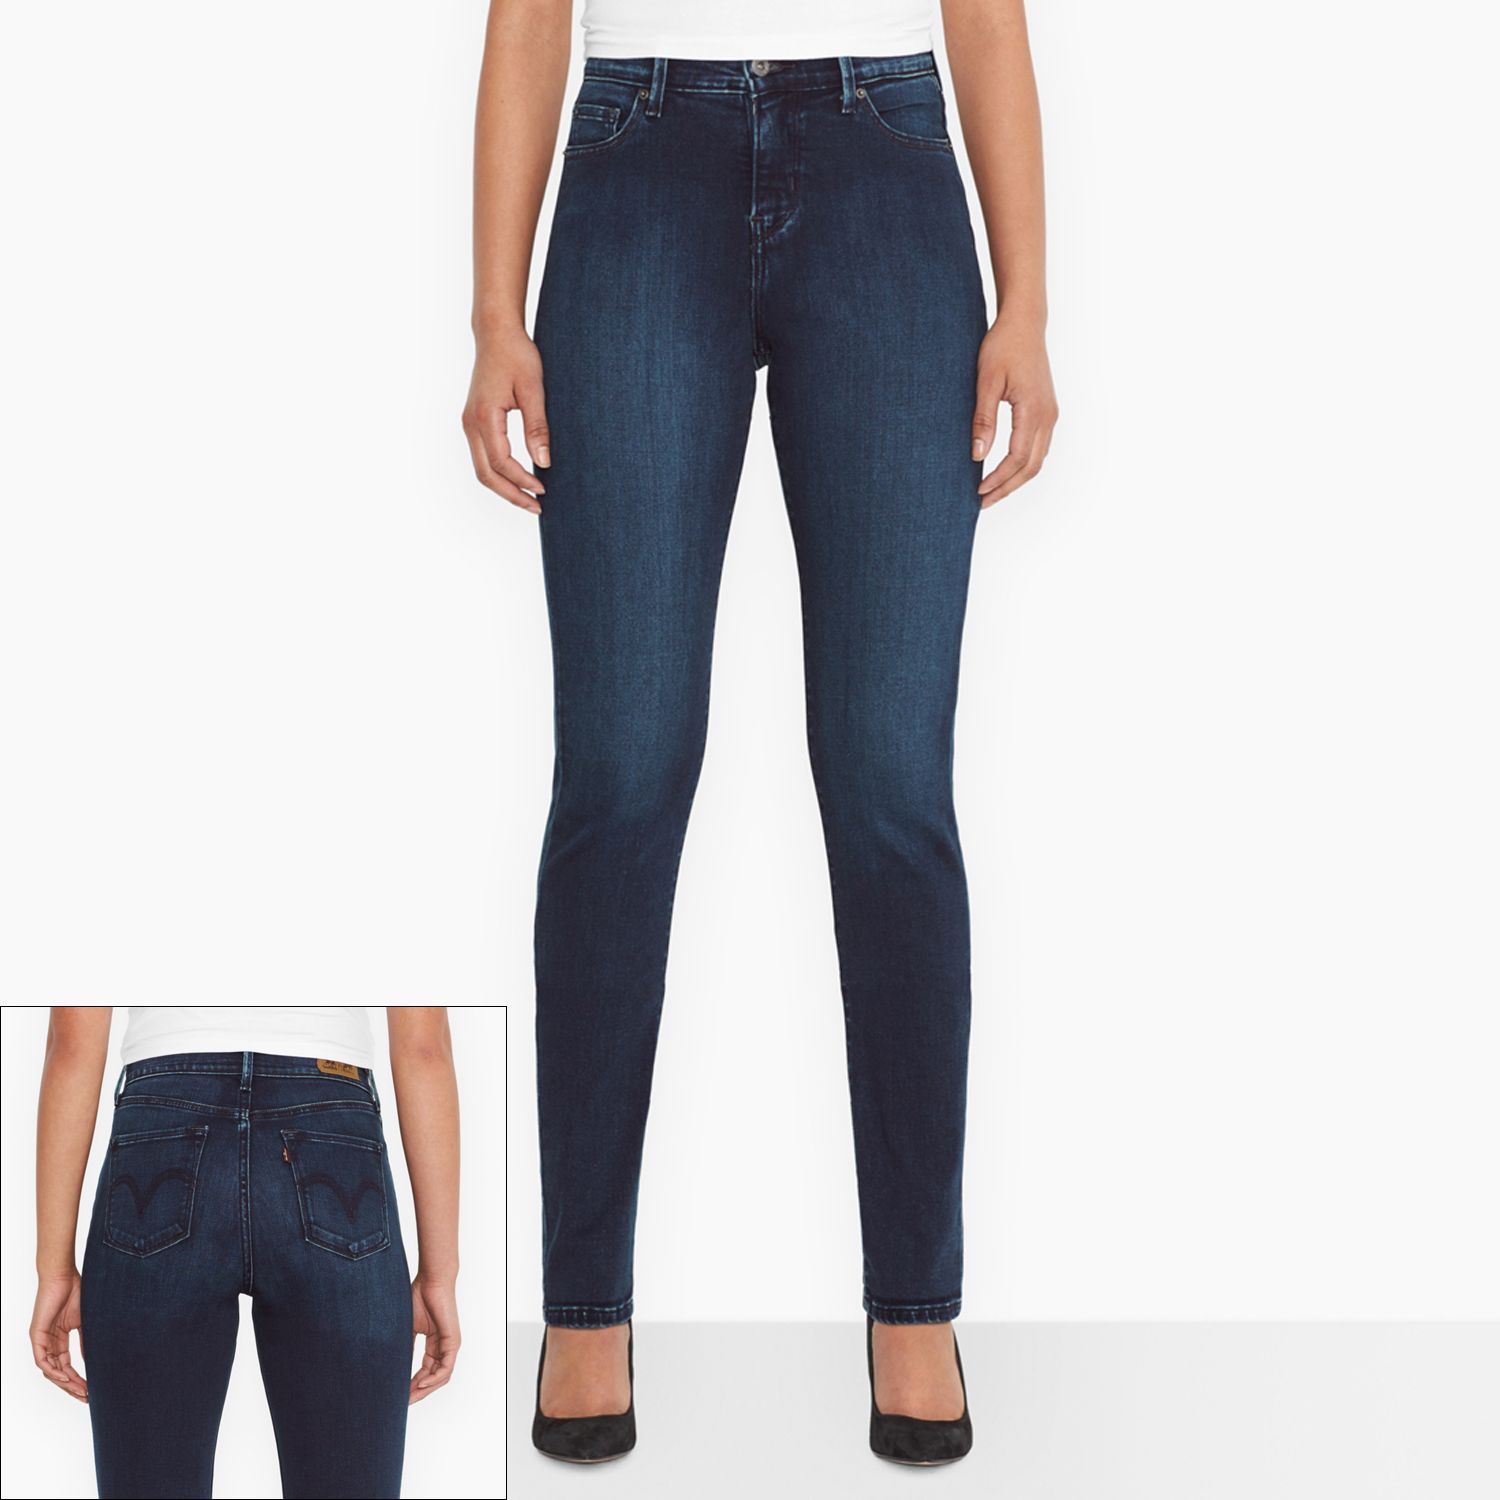 levi's 512 perfectly slimming skinny jeans